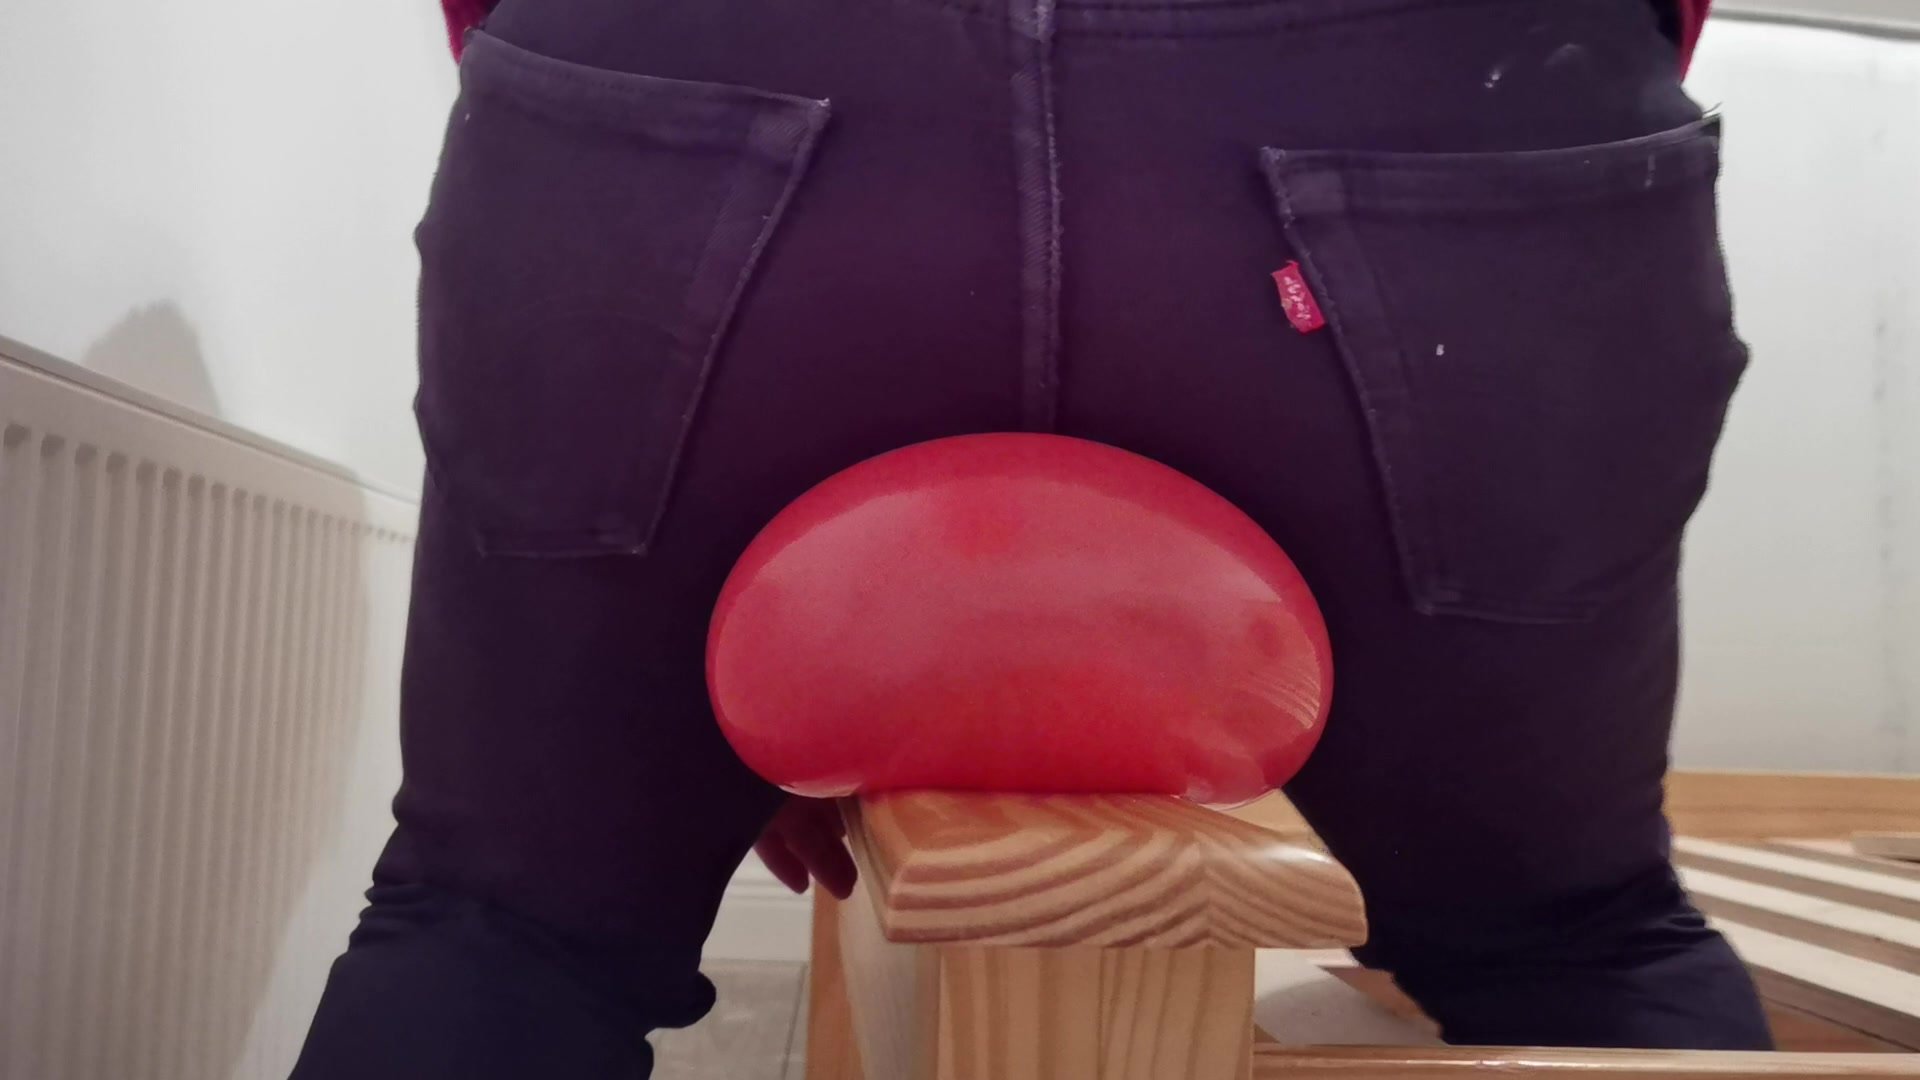 Sit popping balloon tight jeans - video 4